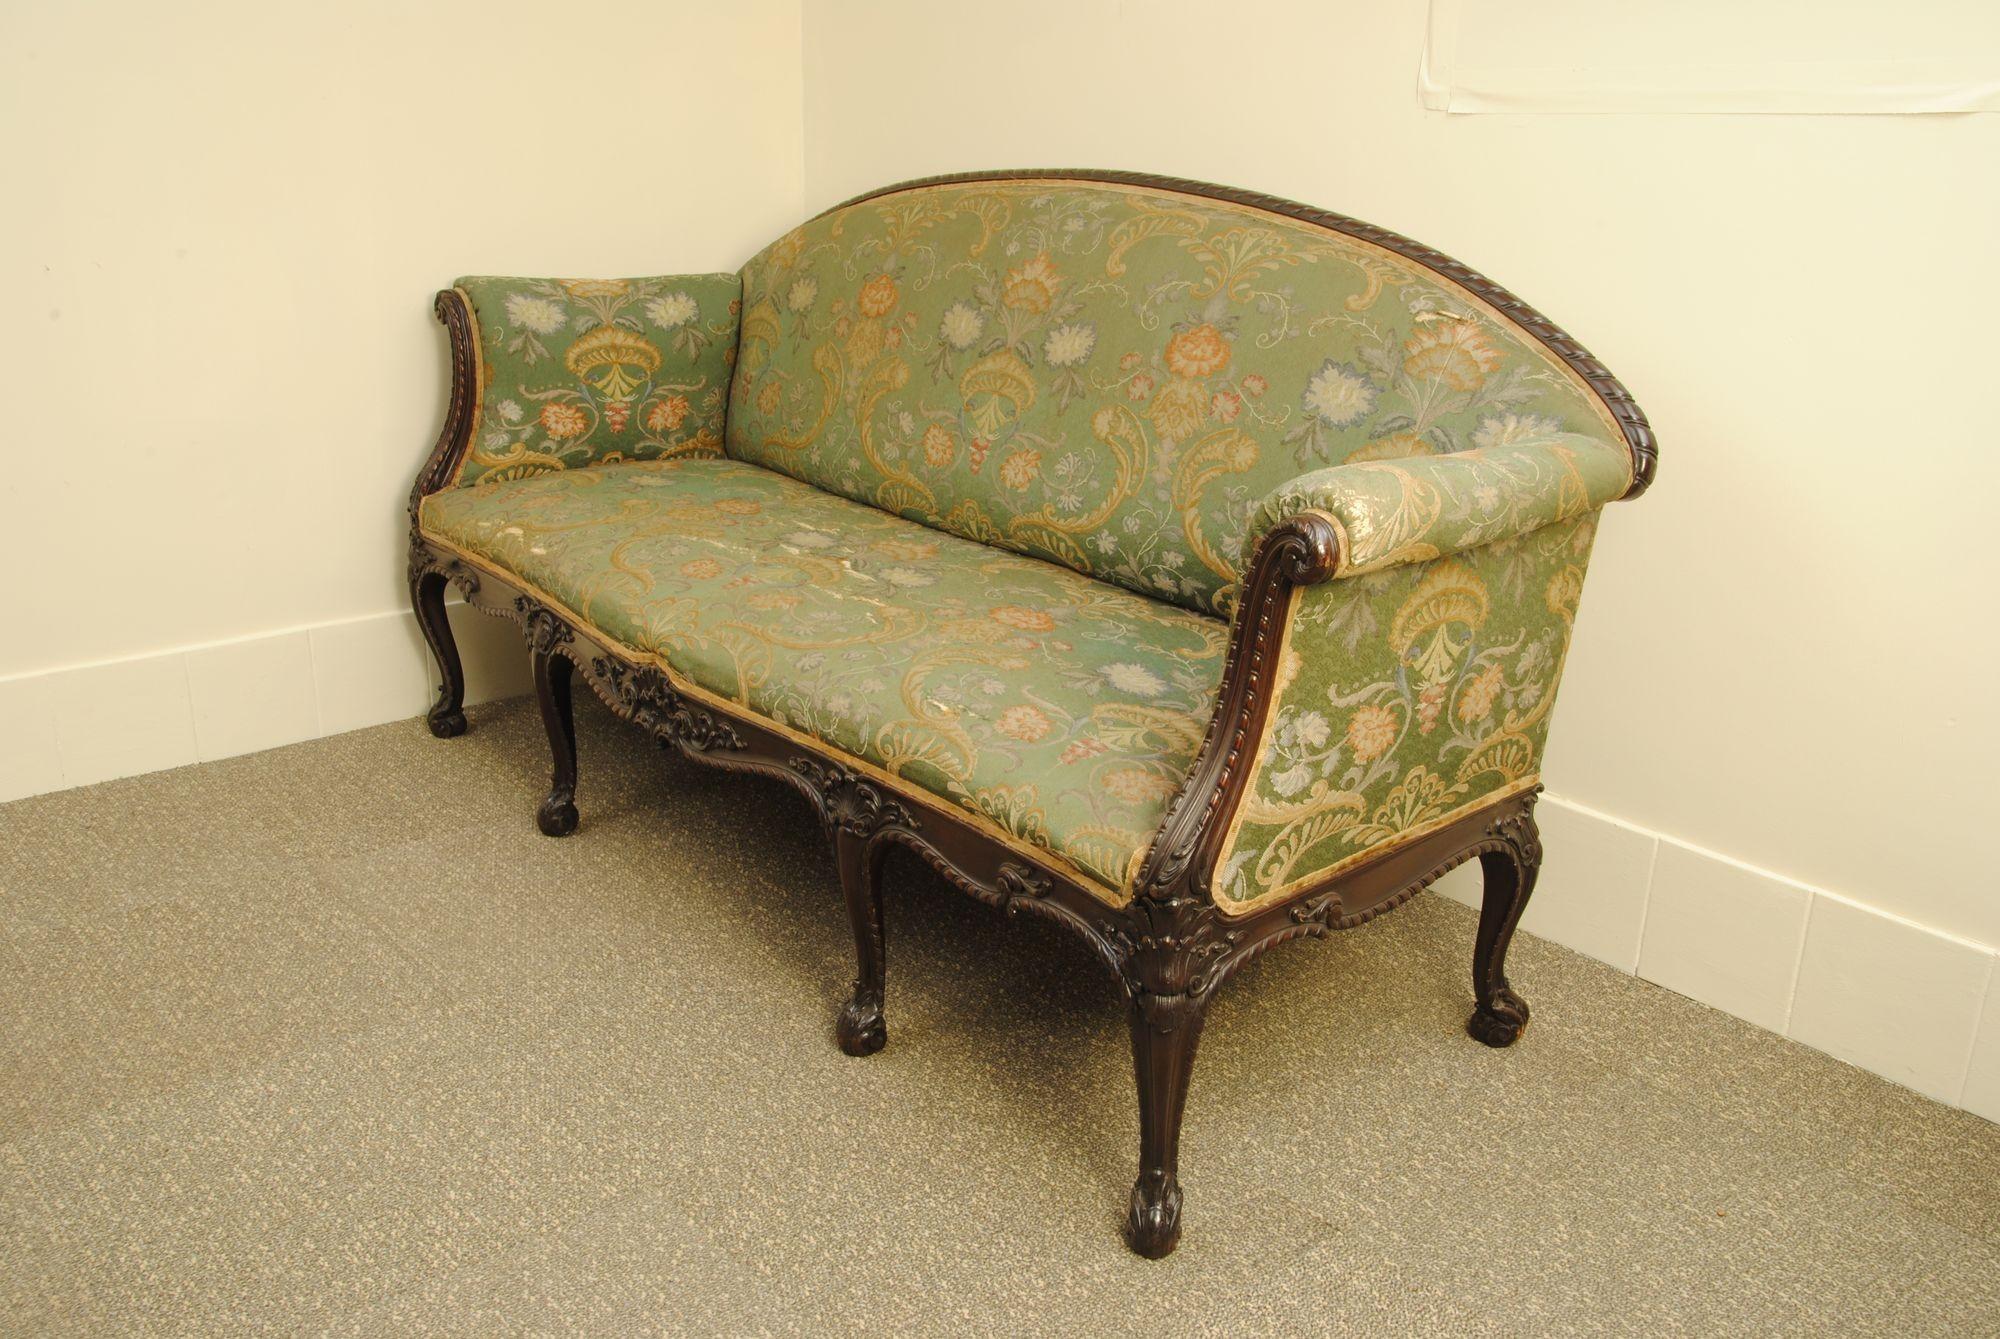 A late 19th century carved mahogany sofa with elegant cabriole legs, fine quality and design.